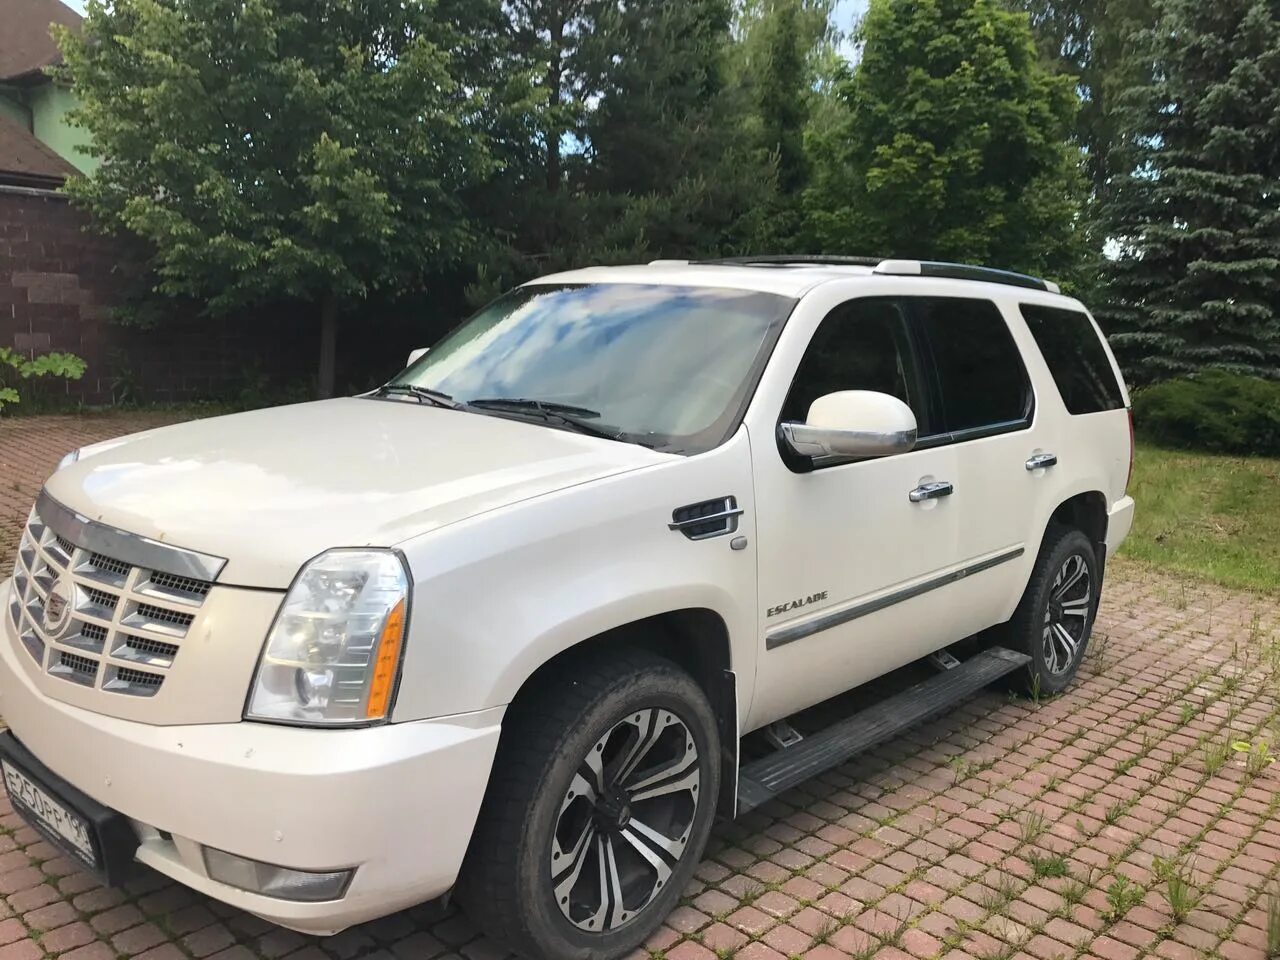 Прода ев. Кадиллак gмт926. Cadillac Escalade gмт926 2008. Кадиллак gмт926 2011. Саdillас gмт926 Еsсаlаdе.